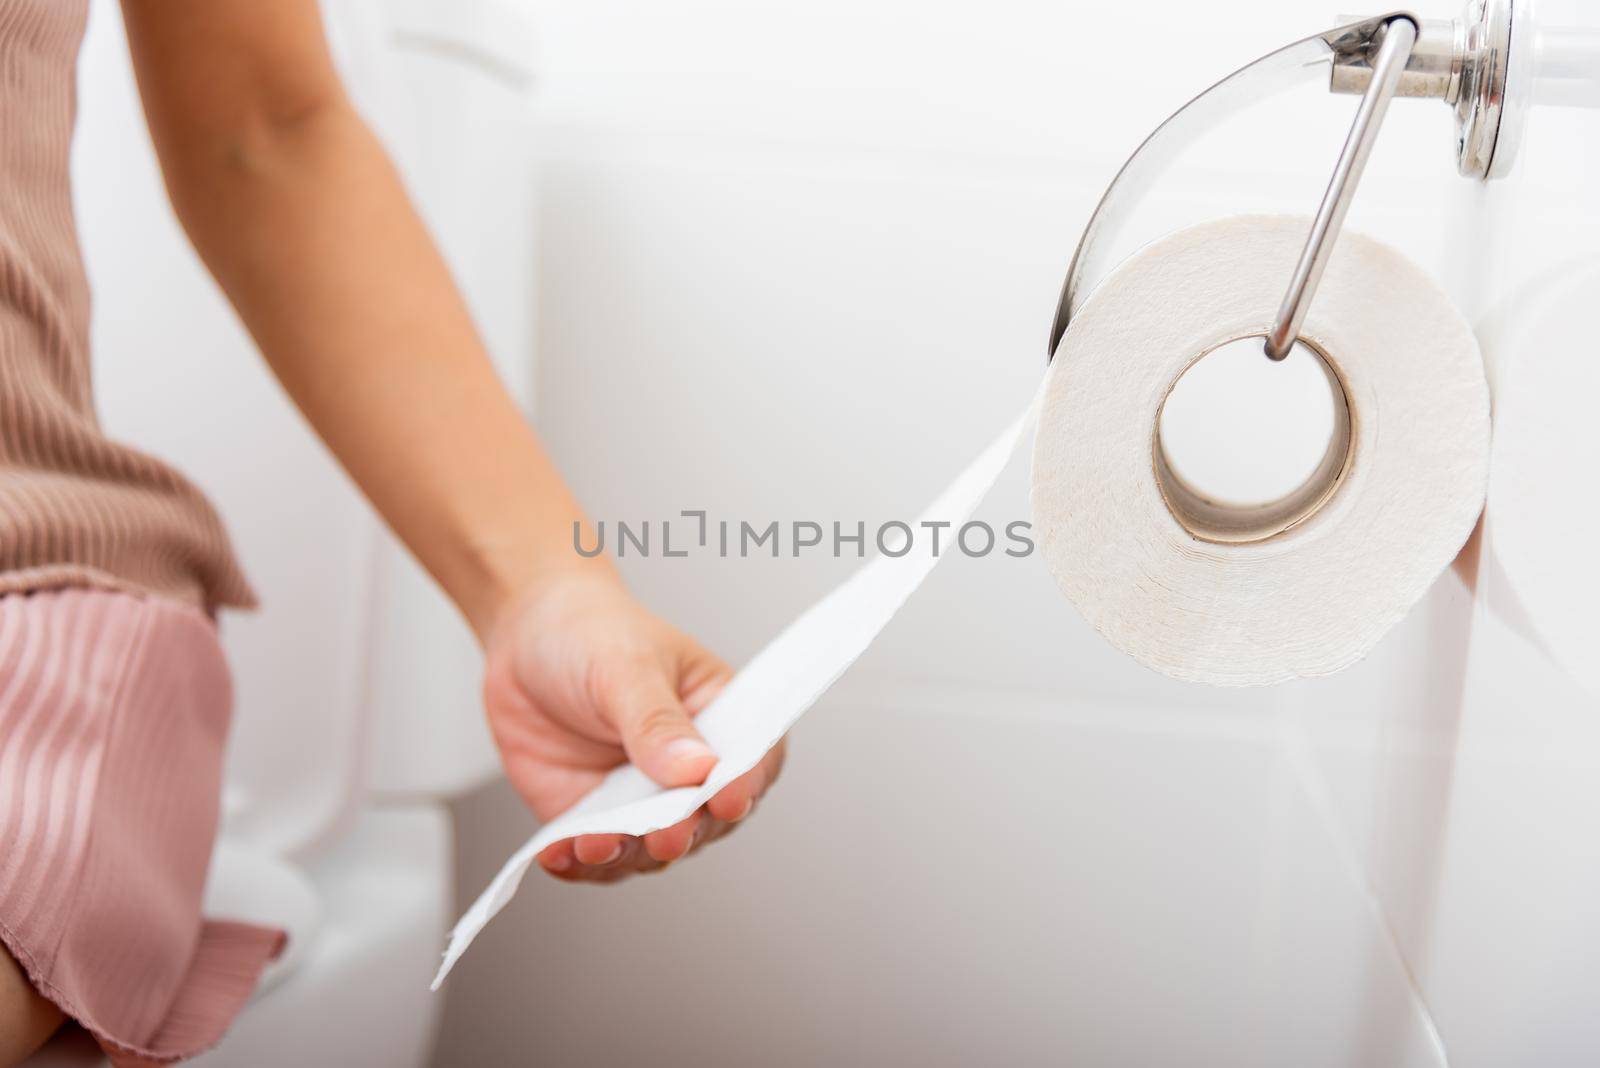 Closeup hand pulling toilet paper roll in holder for wipe	Closeup hand pulling toilet paper roll in holder for wipe, woman sitting on toilet she taking and tearing white tissue on wall to towel clean in bathroom, Healthcare concept by Sorapop